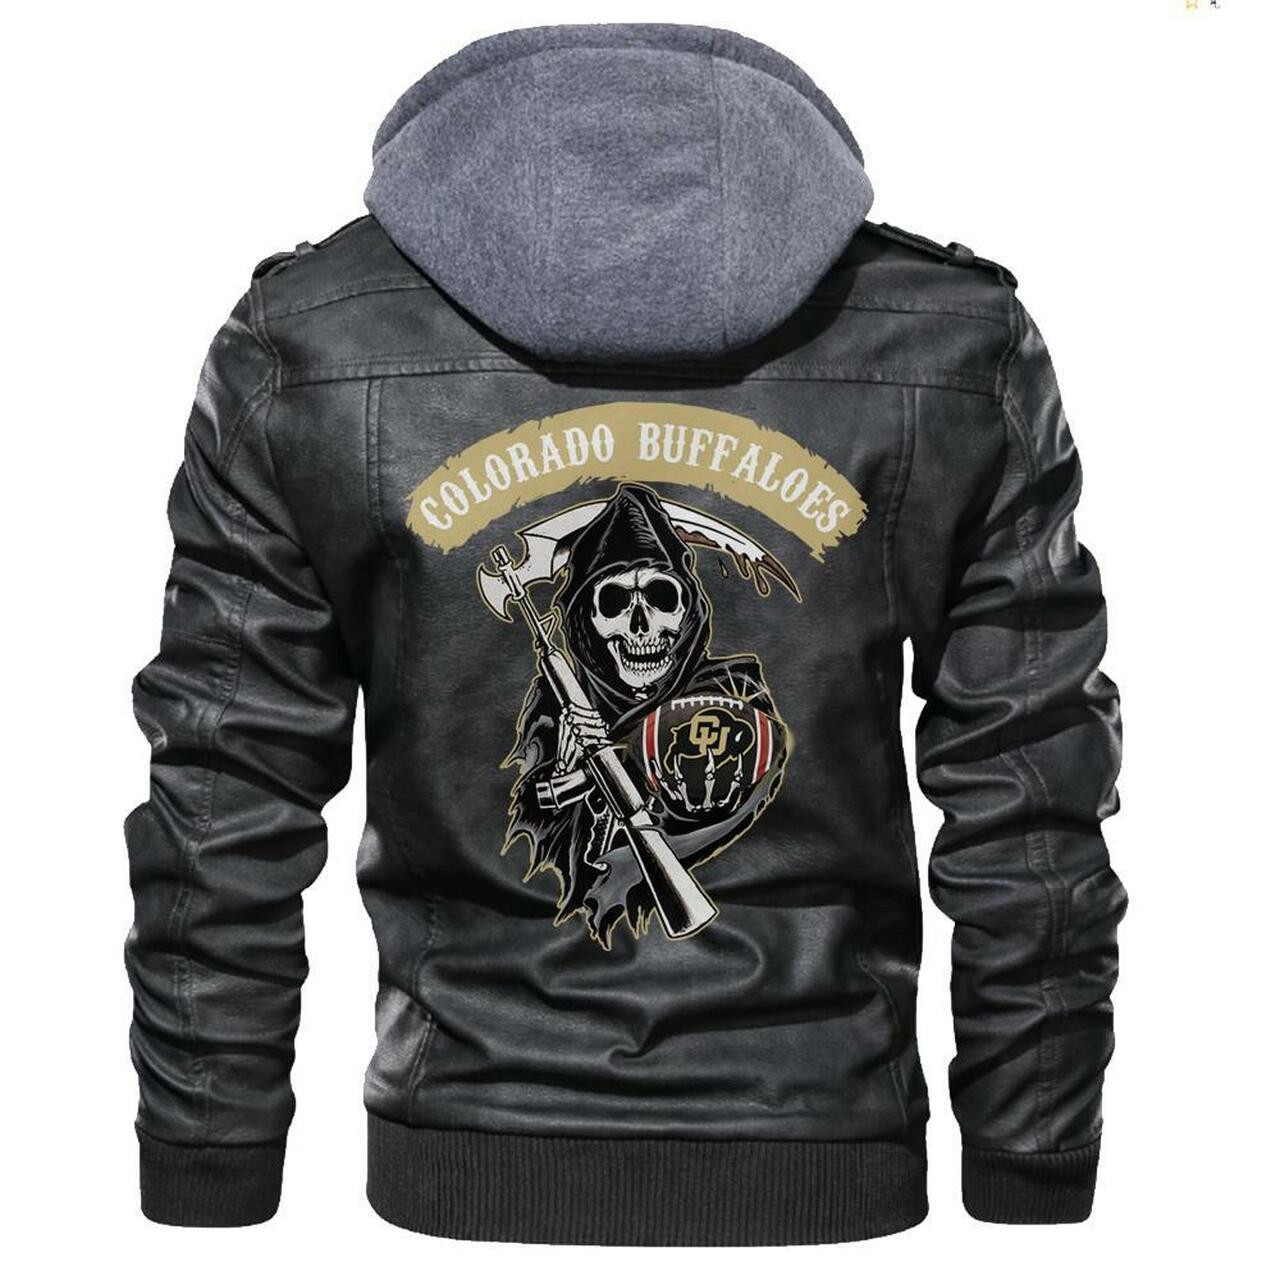 Check out and find the right leather jacket below 86